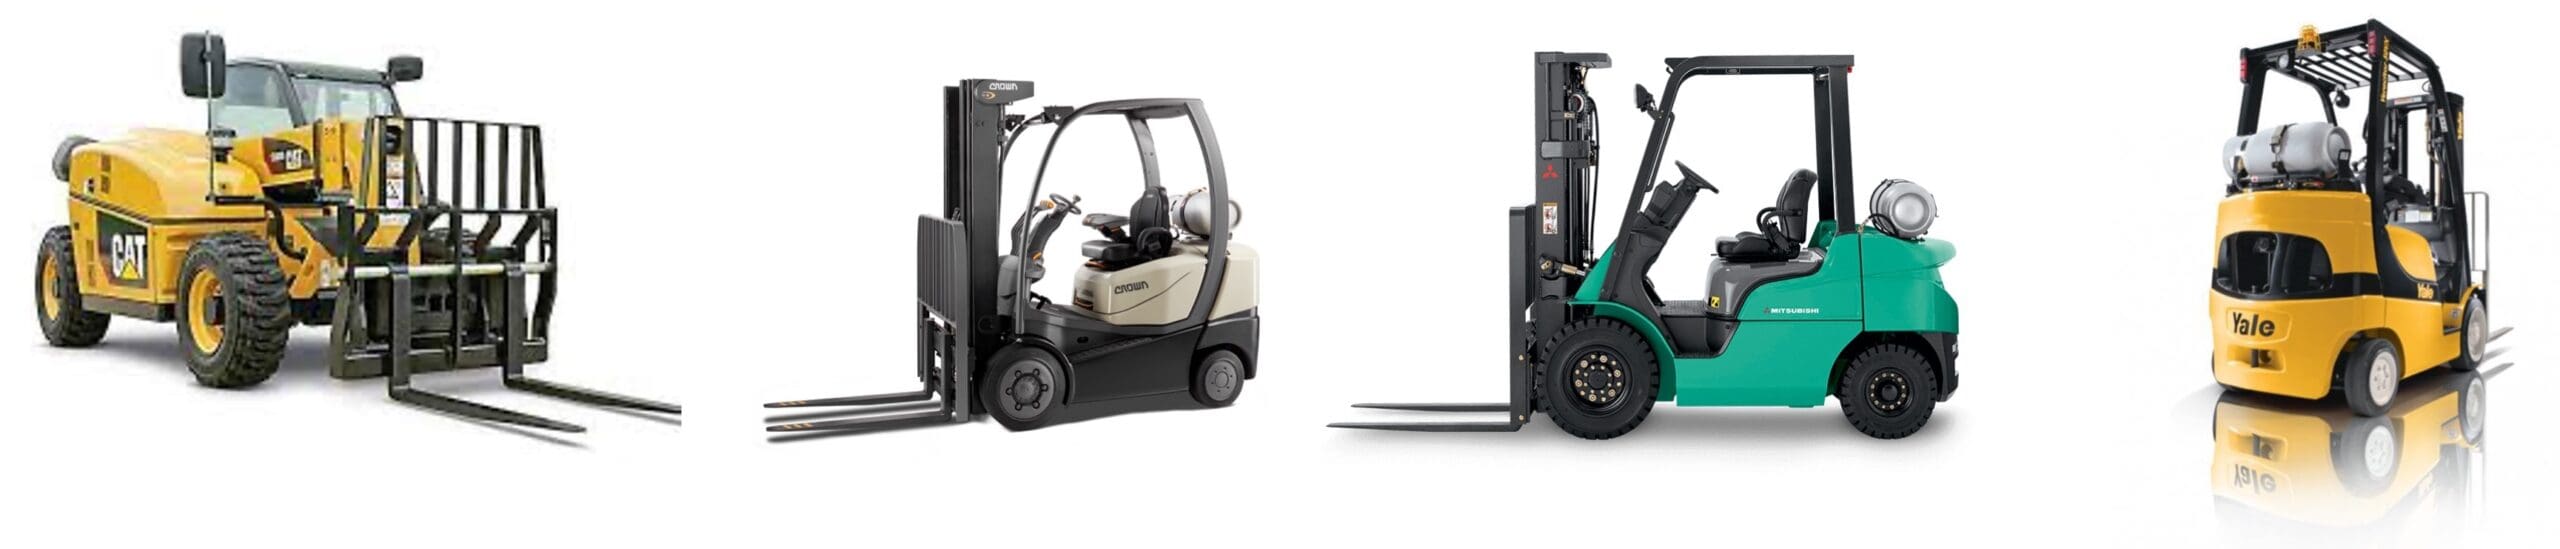 Rough Terrain Forklifts For Sale